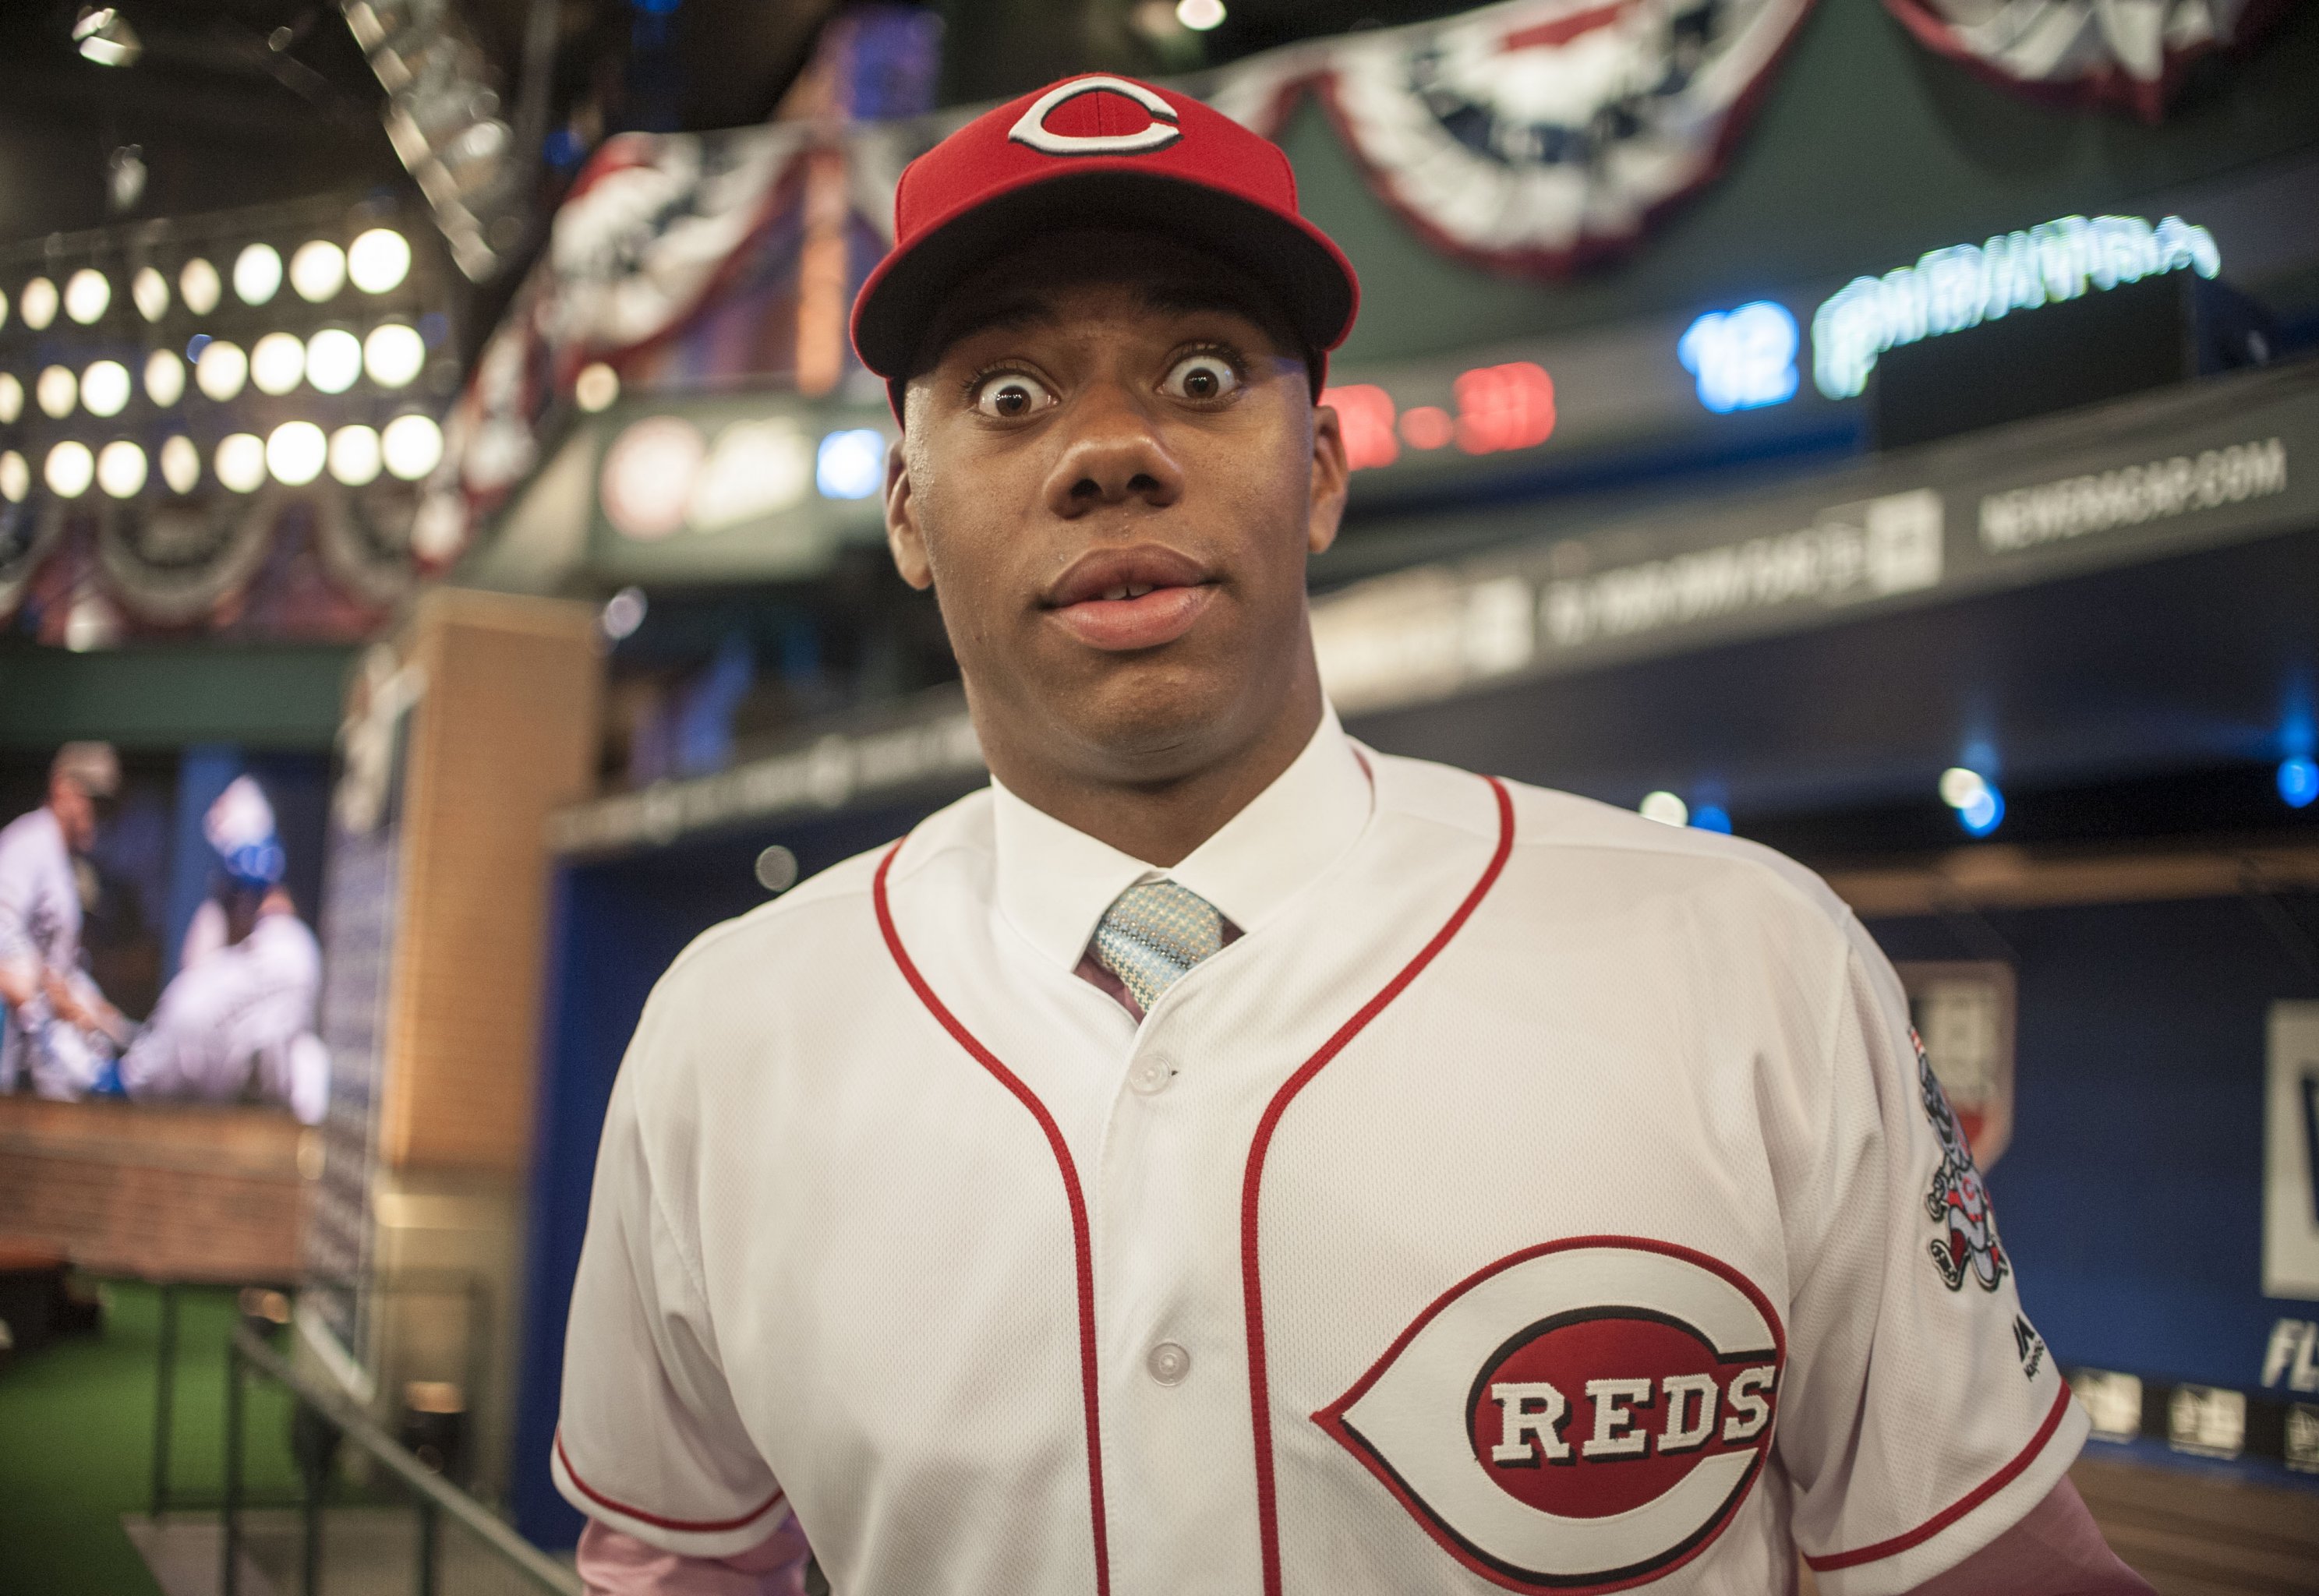 Hunter Greene Is Not the LeBron of Baseball. He Wants to Be Something More., News, Scores, Highlights, Stats, and Rumors